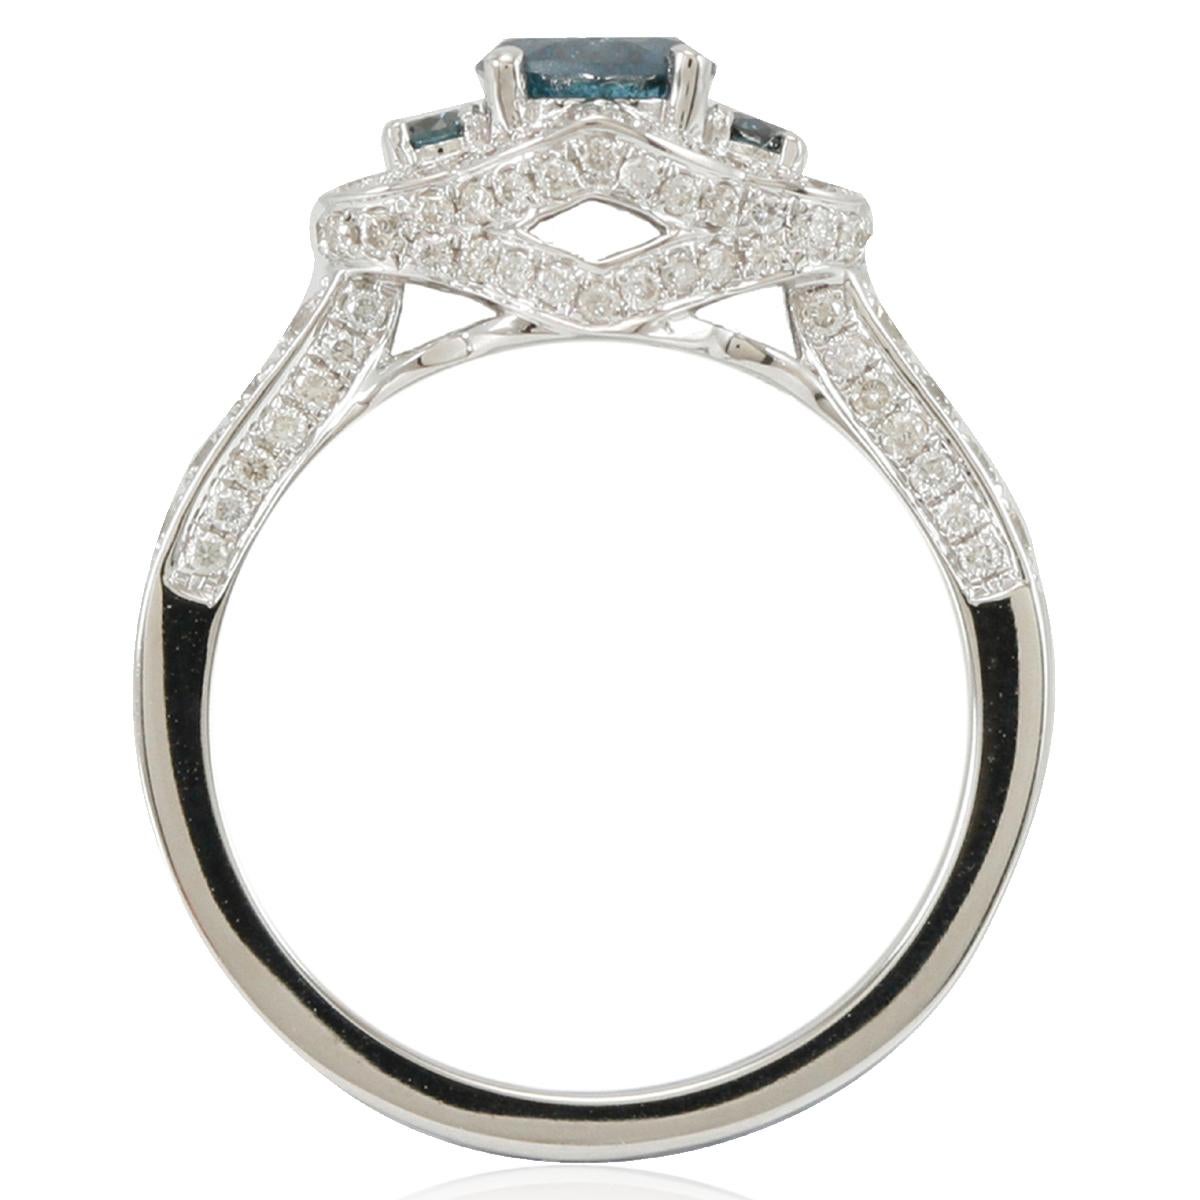 This strikingly gorgeous, one-of-a-kind engagement ring by Suzy Levian is a 3-stone blue diamond solitaire with a white diamond pave halo. Elegantly crafted in 14K white gold, this ring features a brilliant-cut round blue diamond center stone and 2